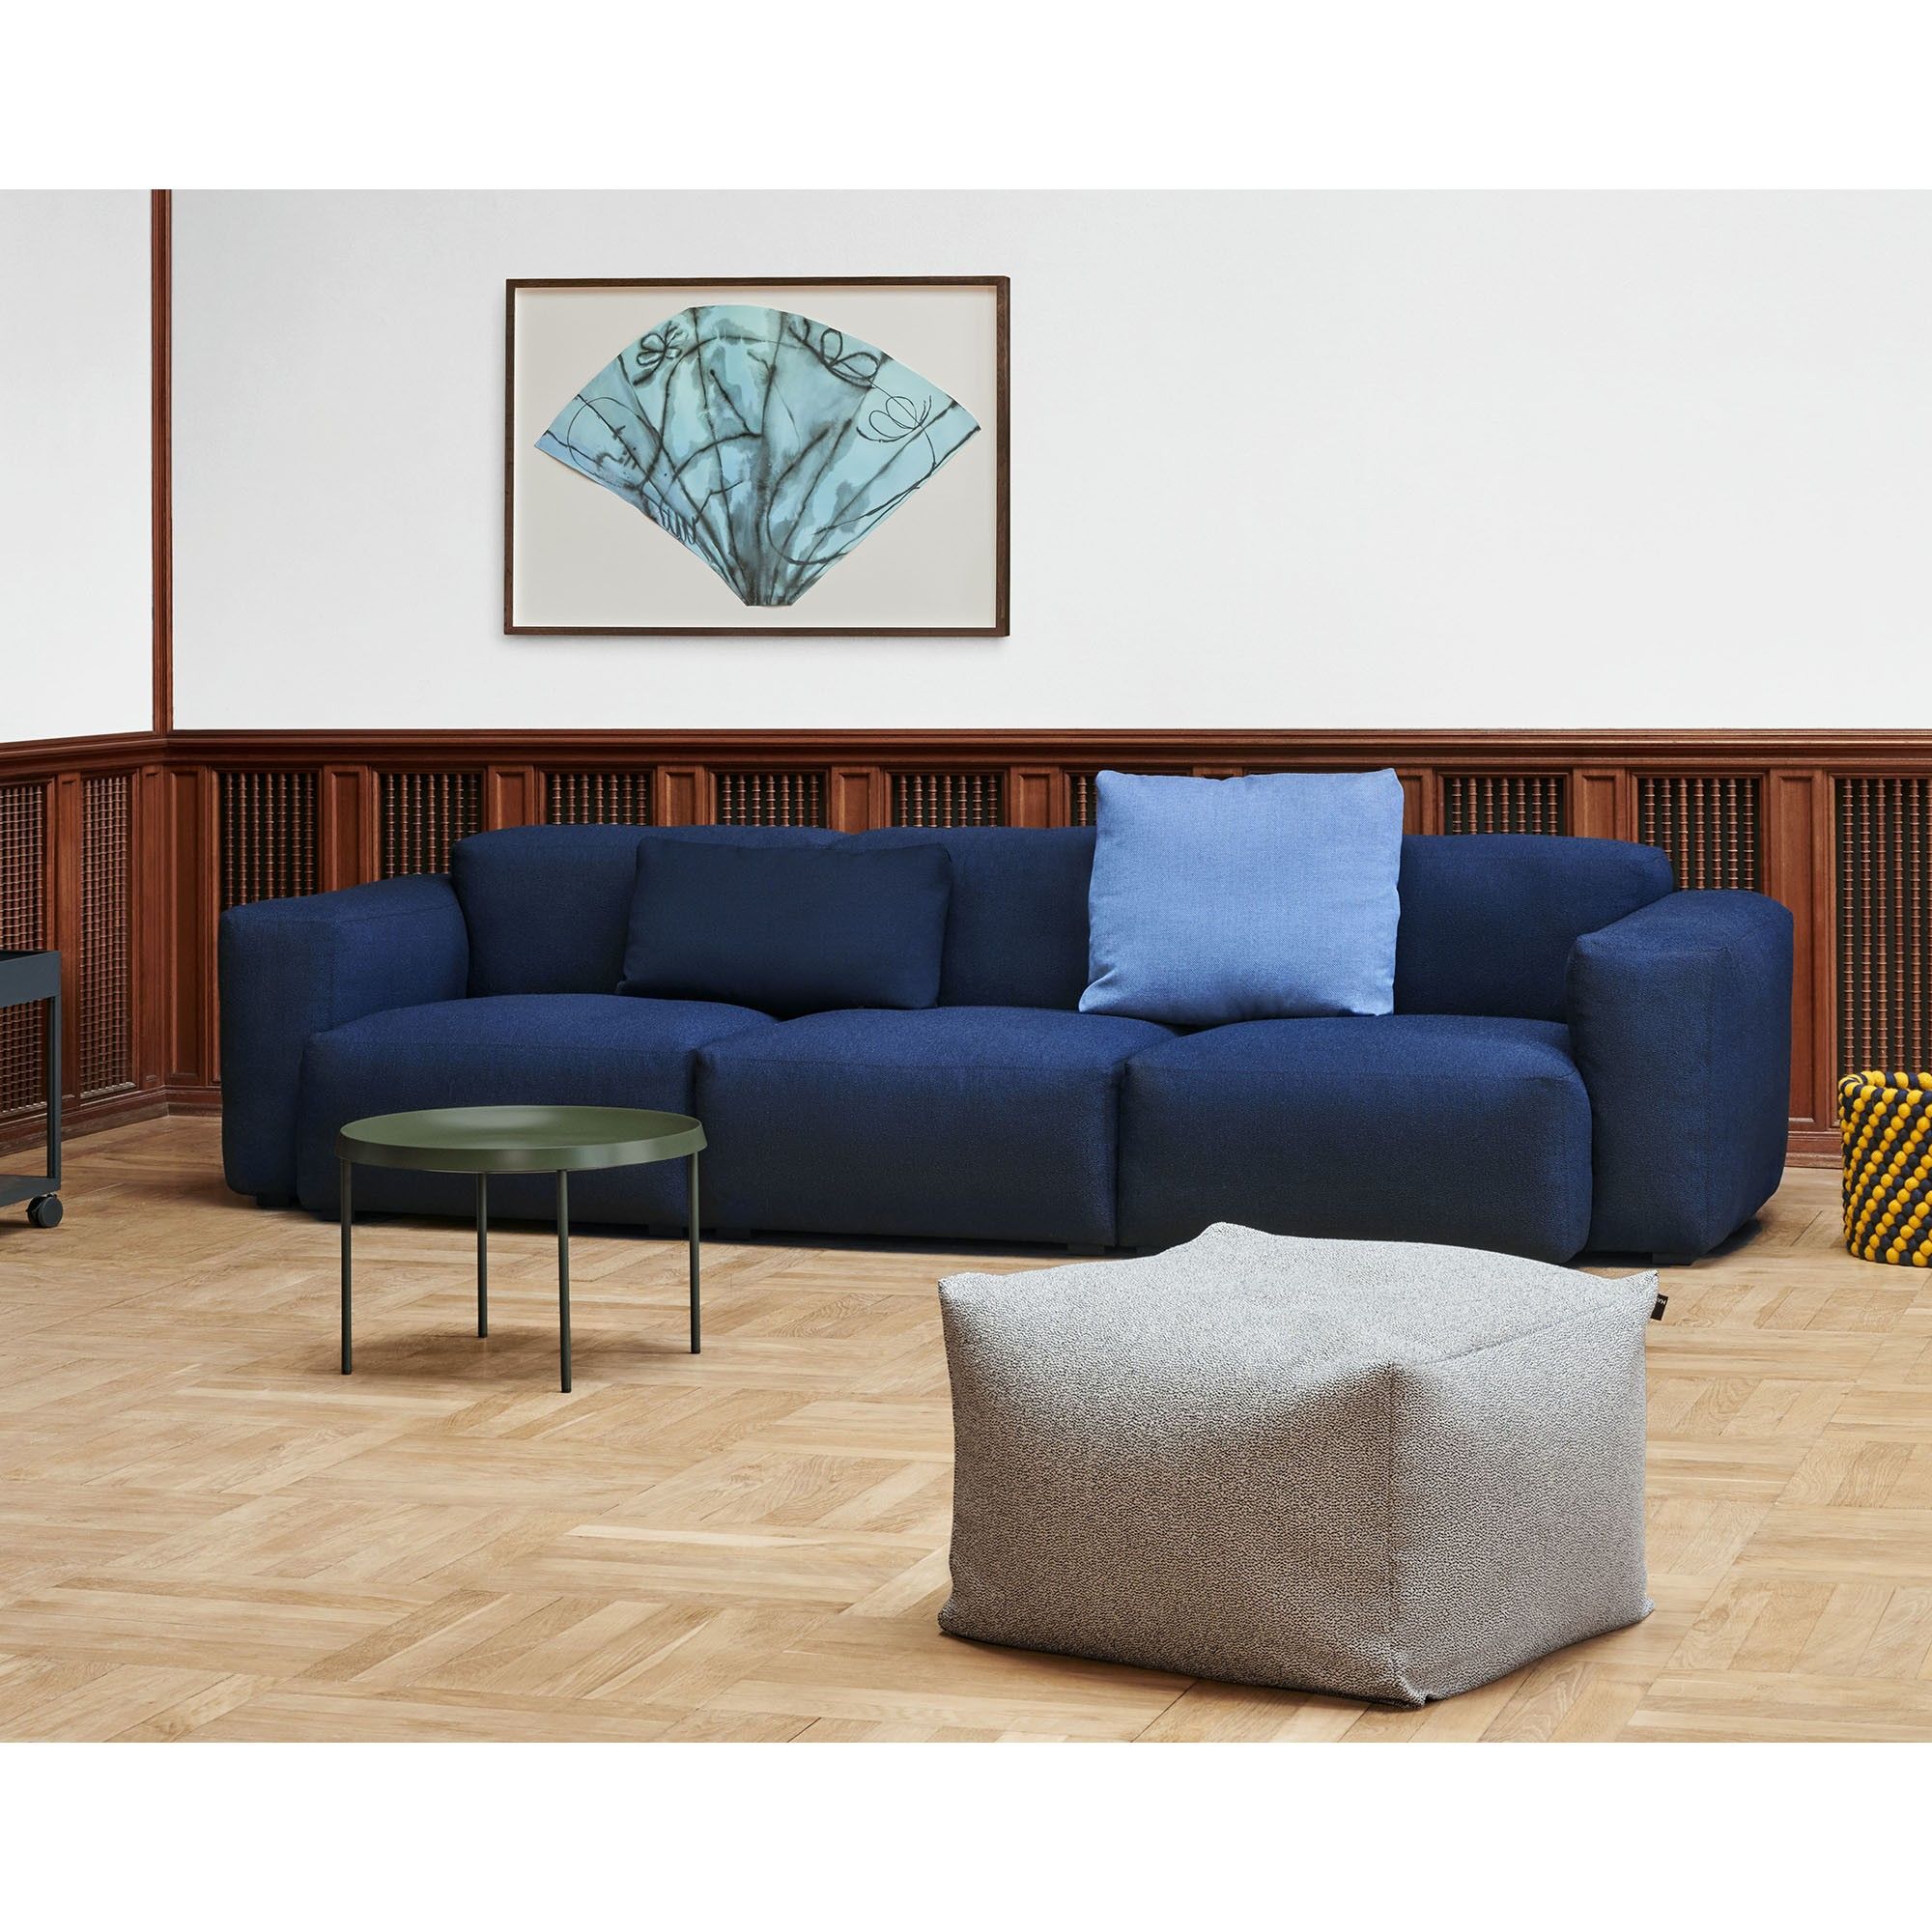 Mags Soft Steelcut Trio 796 Sofa – Hay Regarding Blue Folding Bed Ottomans (View 7 of 15)